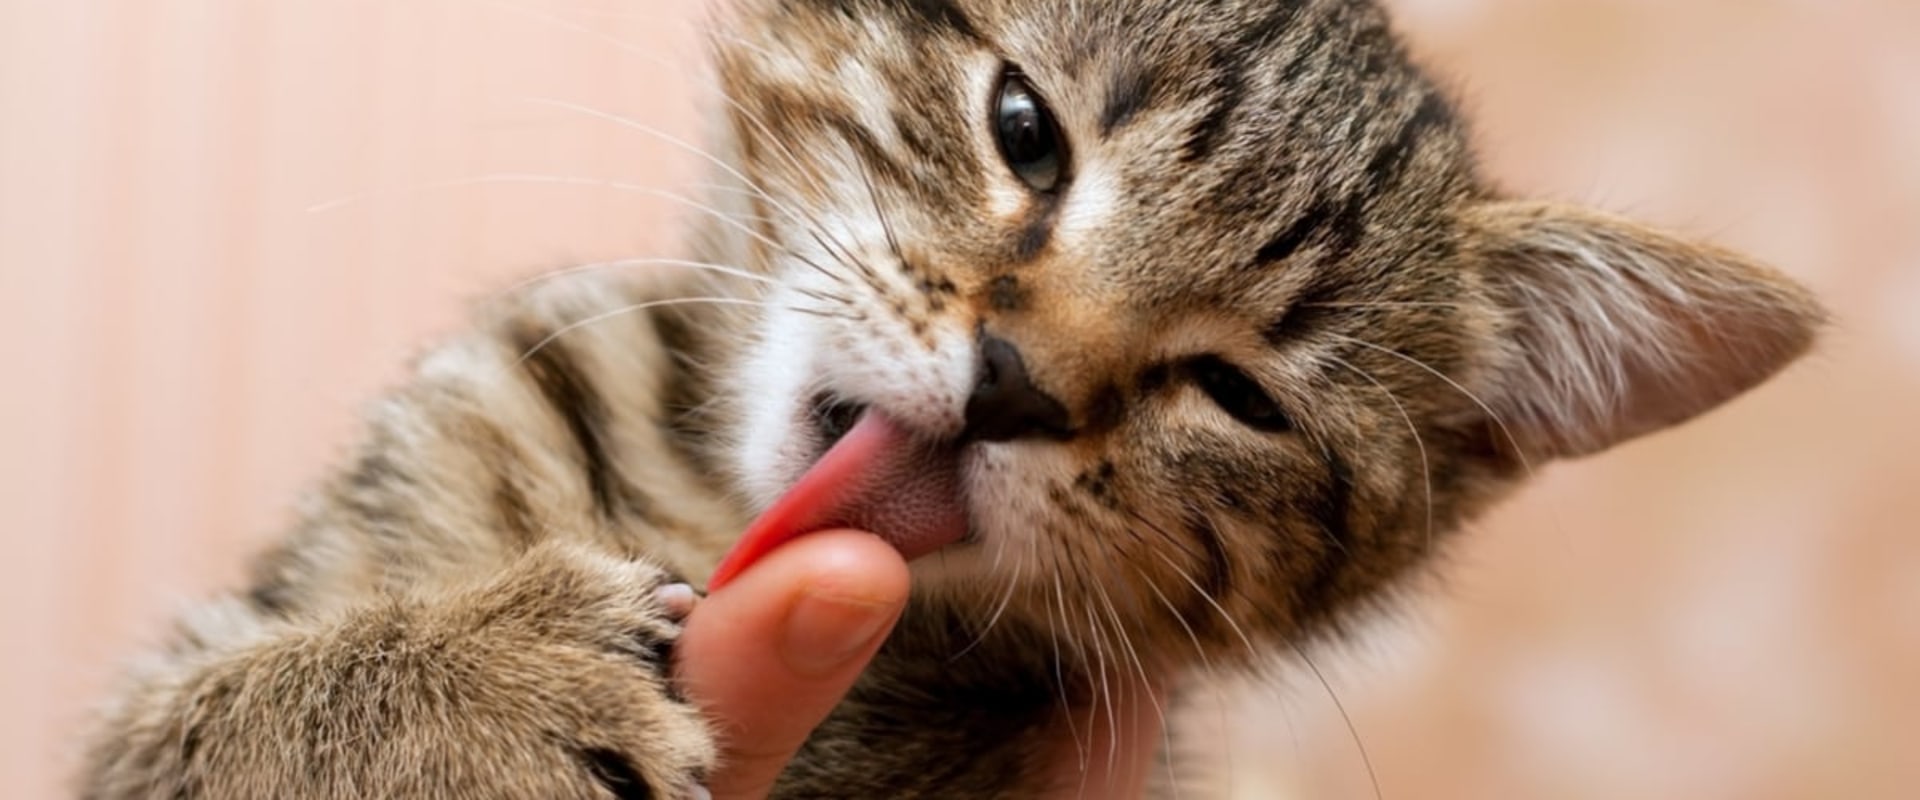 Why kittens lick you?